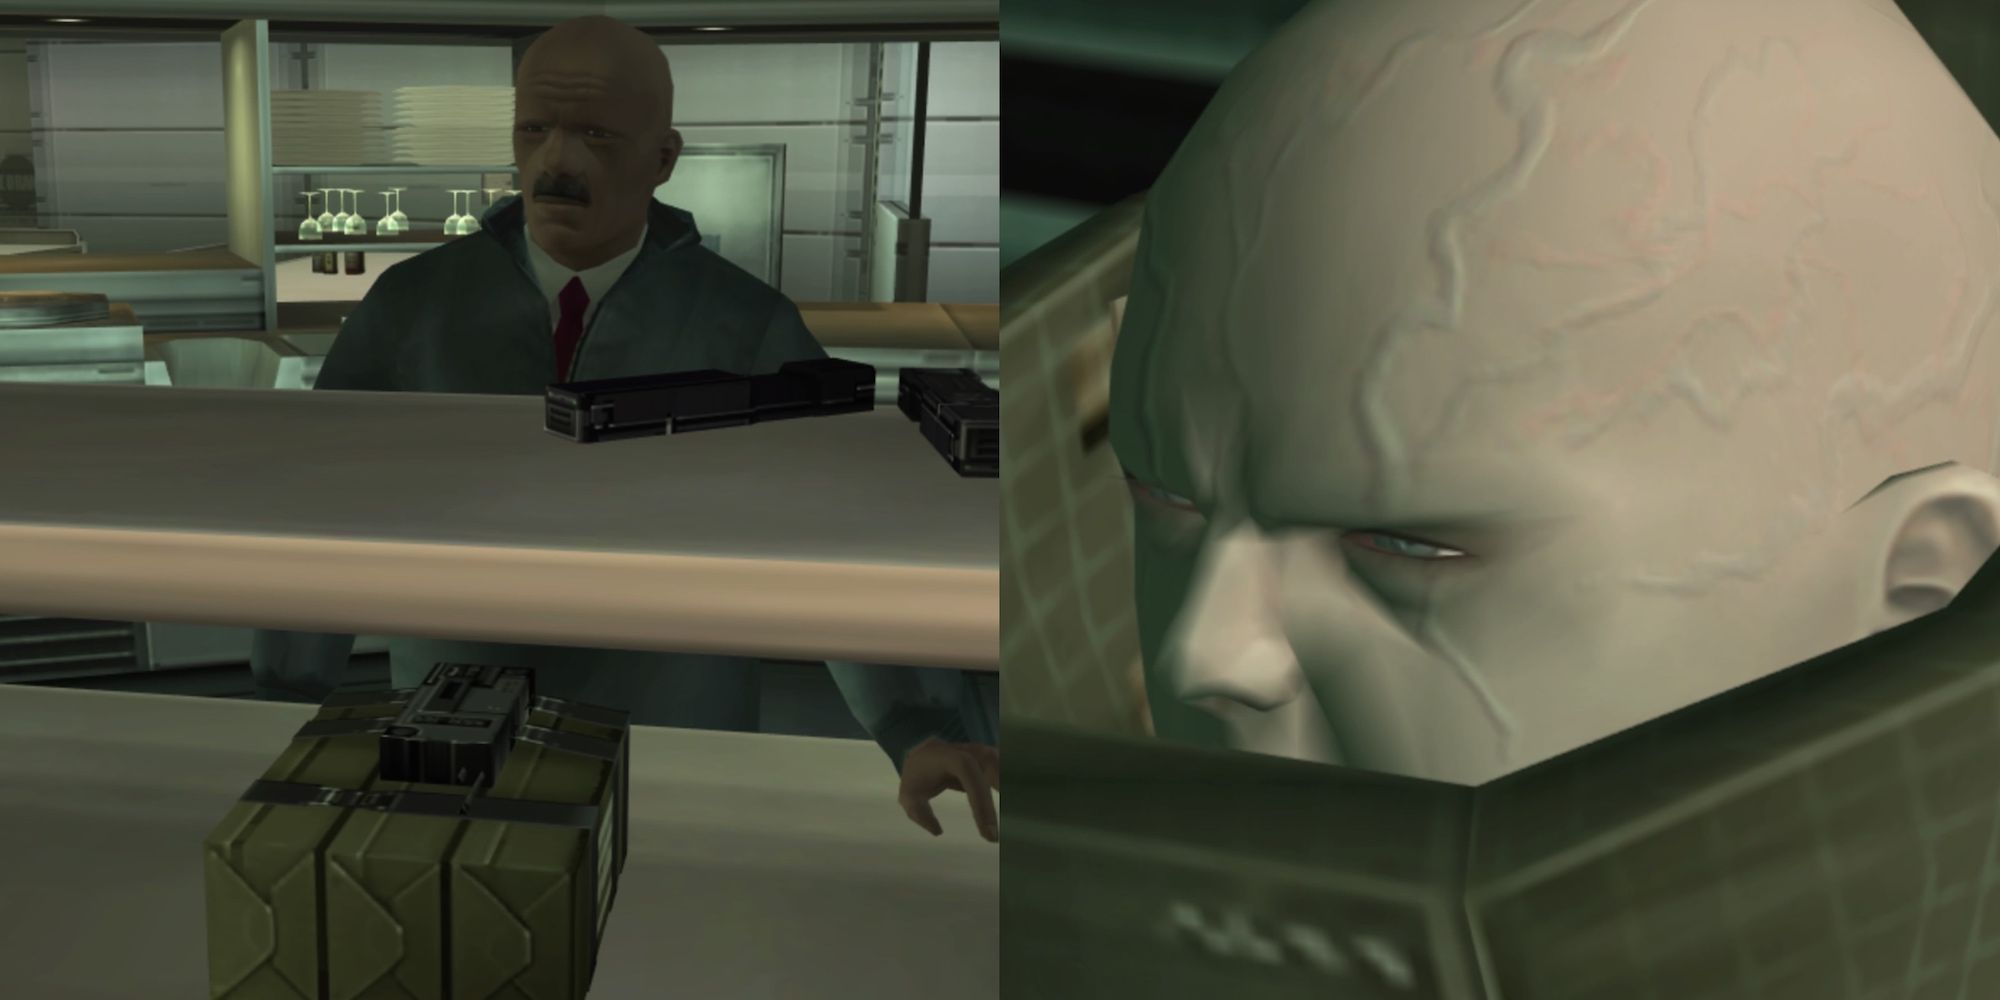 Ranking the Bosses of Metal Gear Solid 2: Sons of Liberty